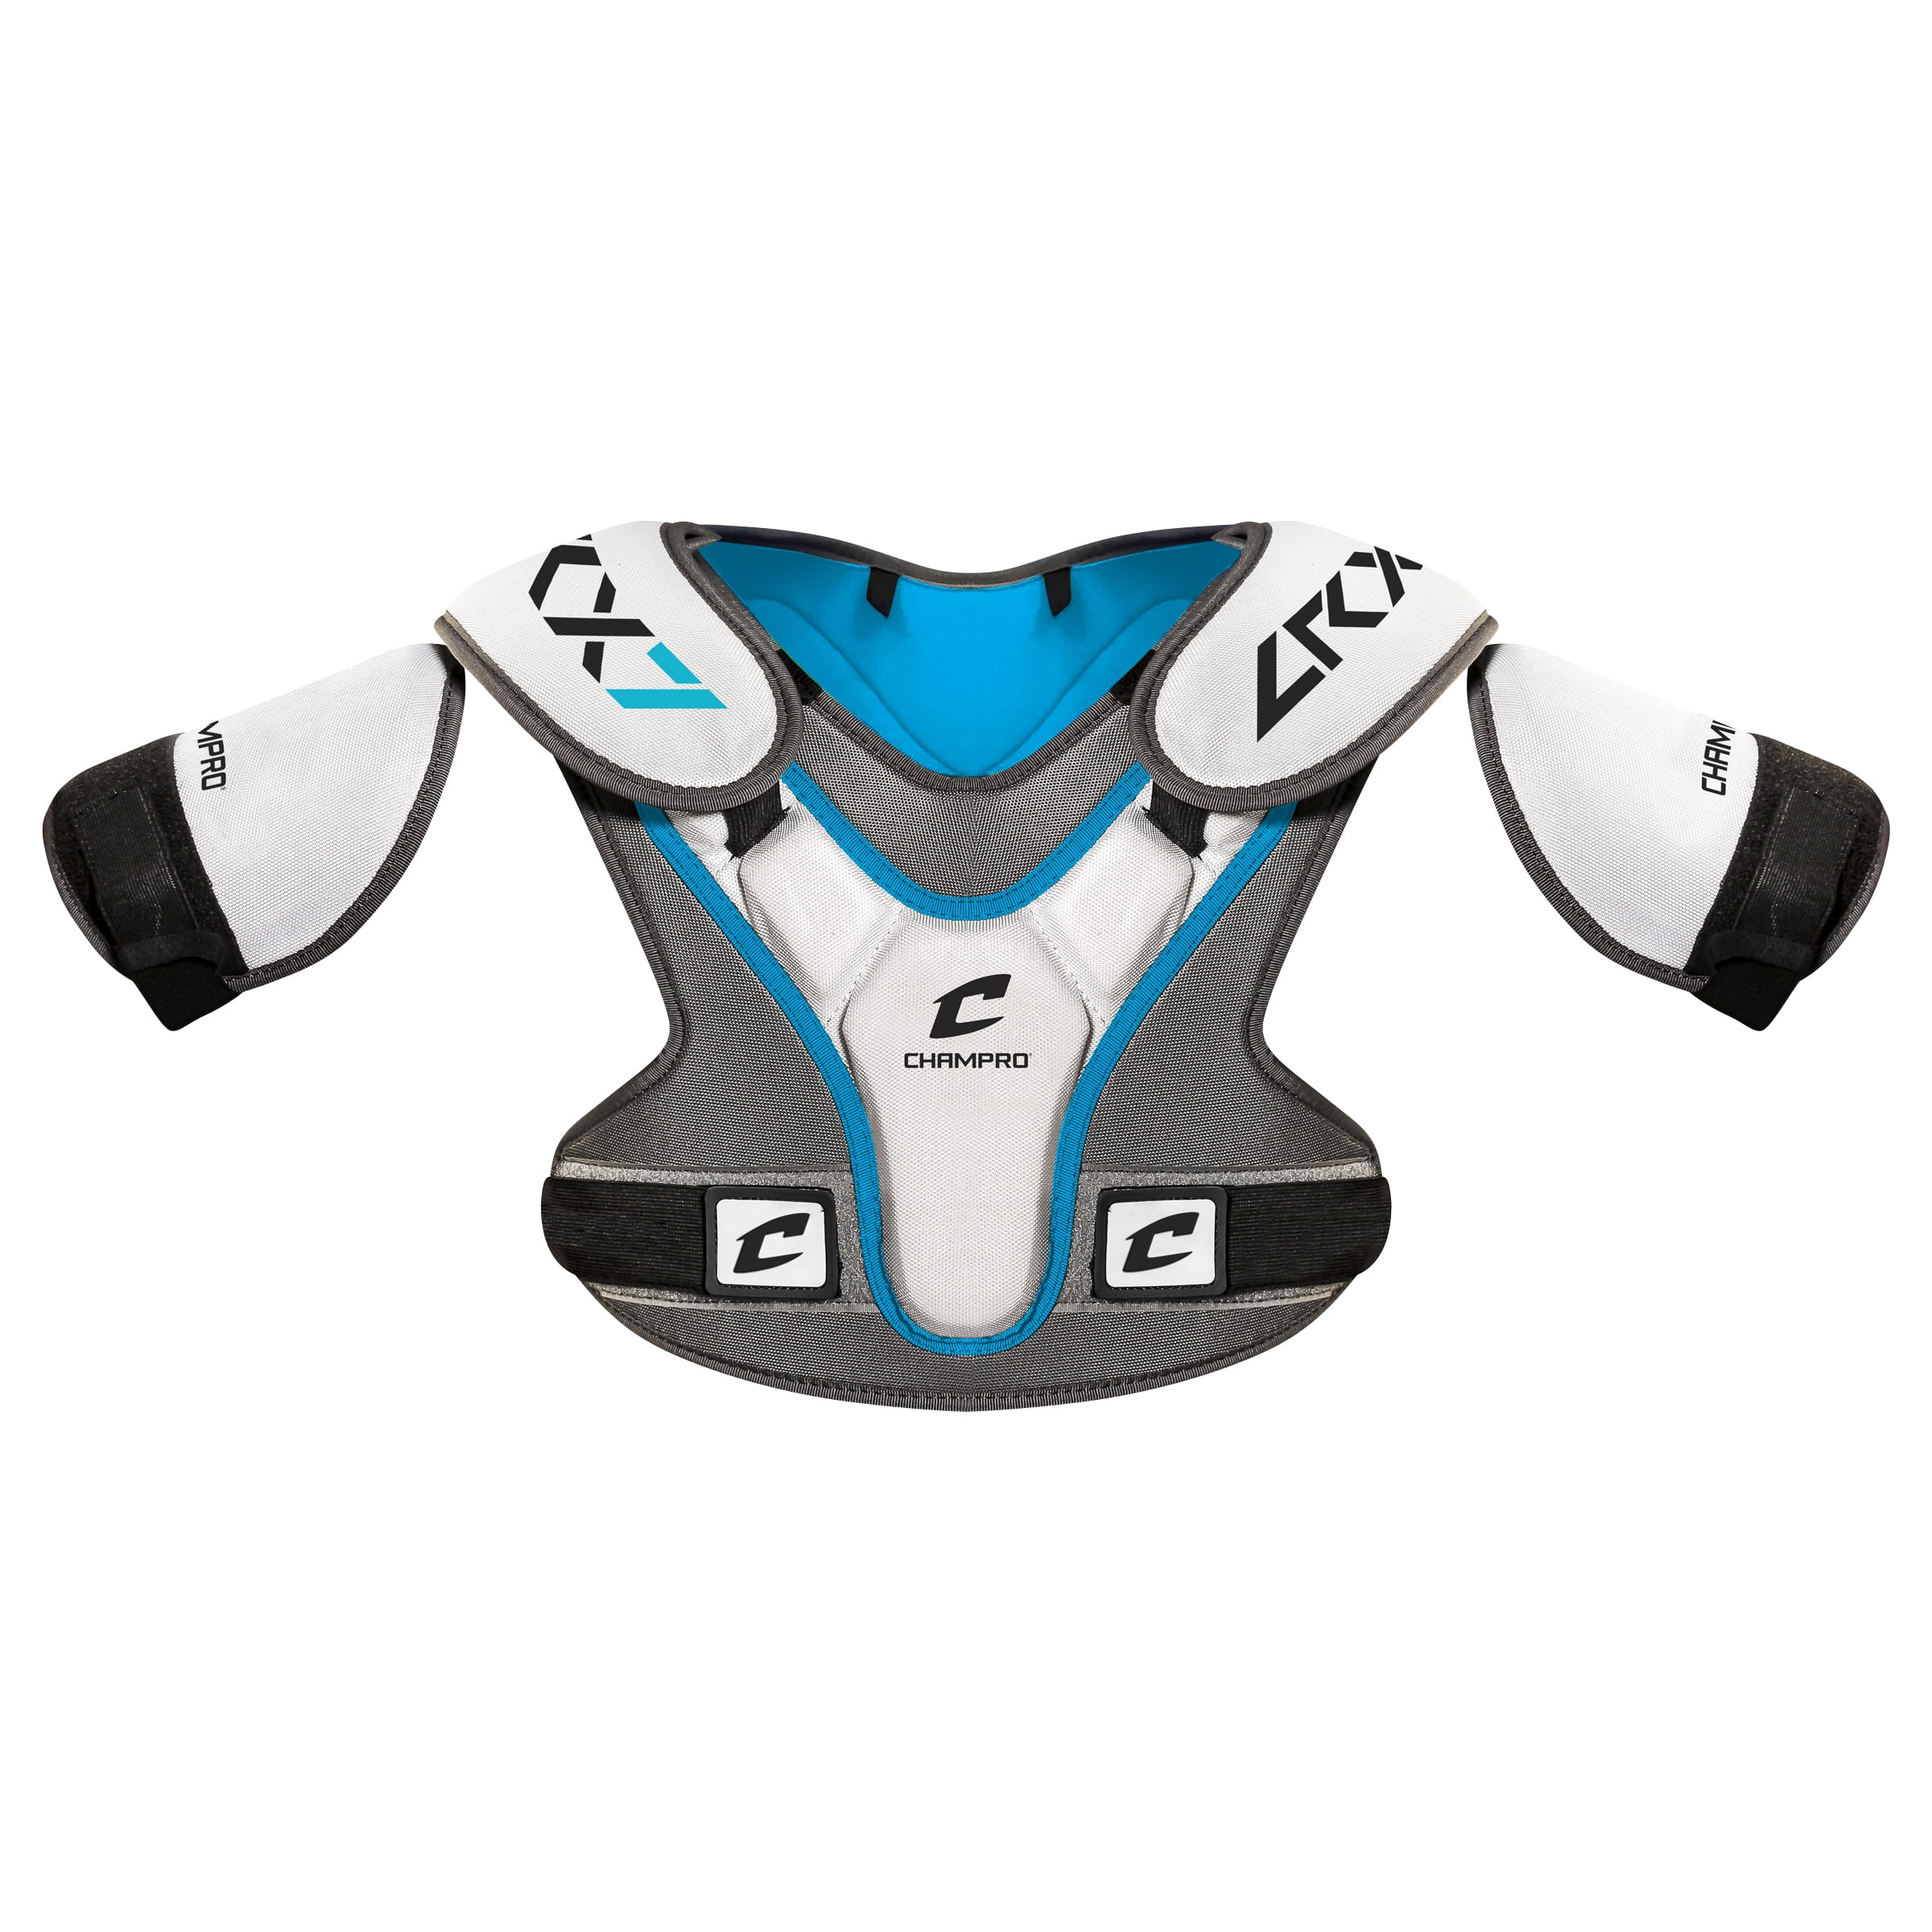 Lacrosse Shoulder Pads  Lowest Price Guaranteed